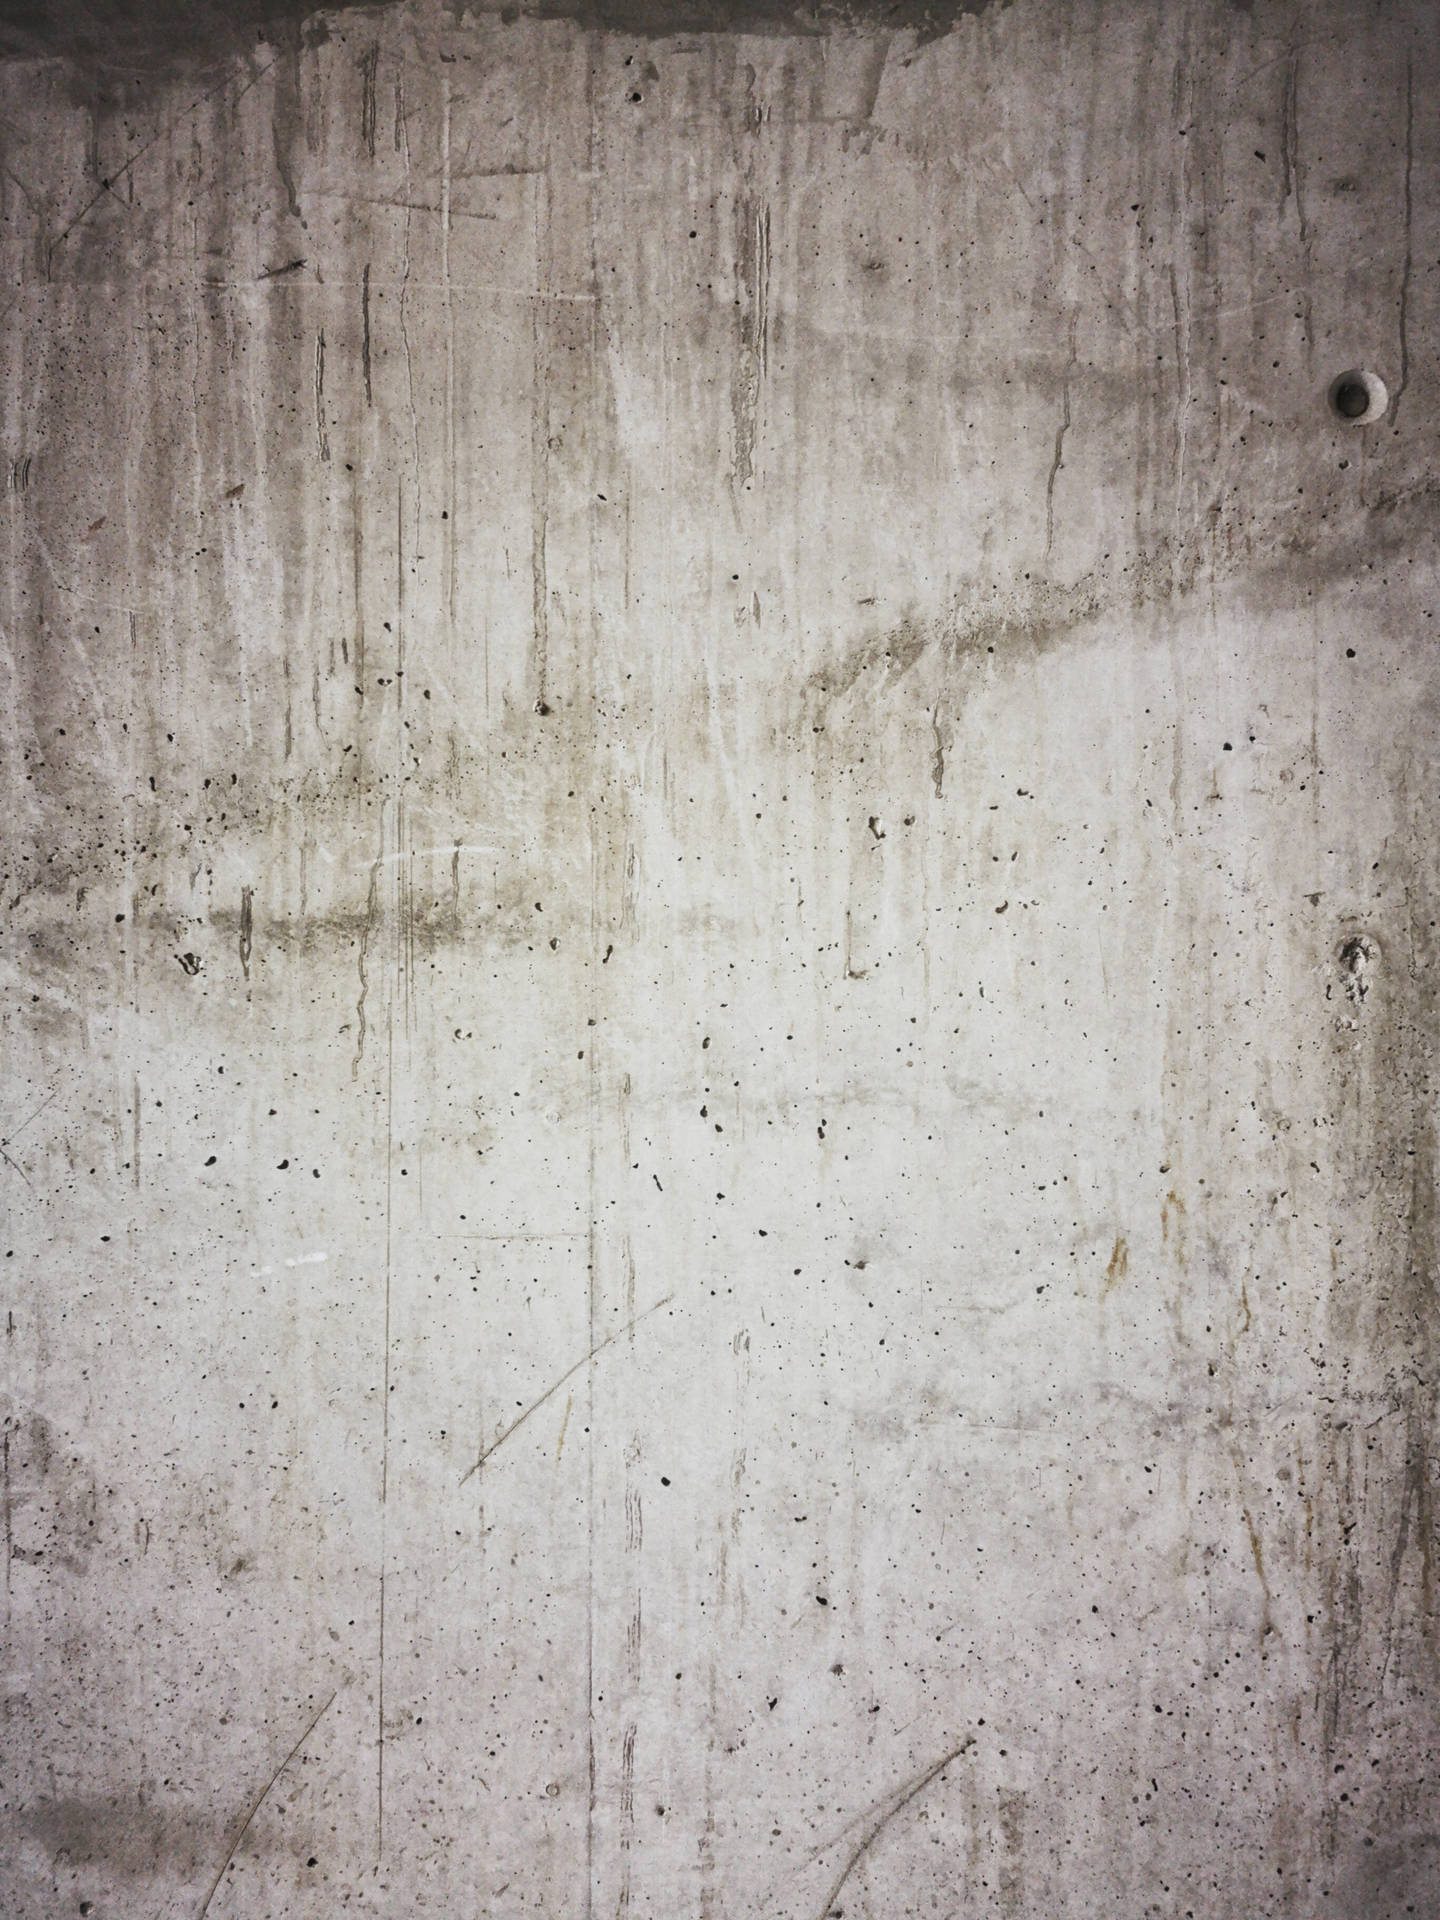 Concrete 5472X7296 Wallpaper and Background Image